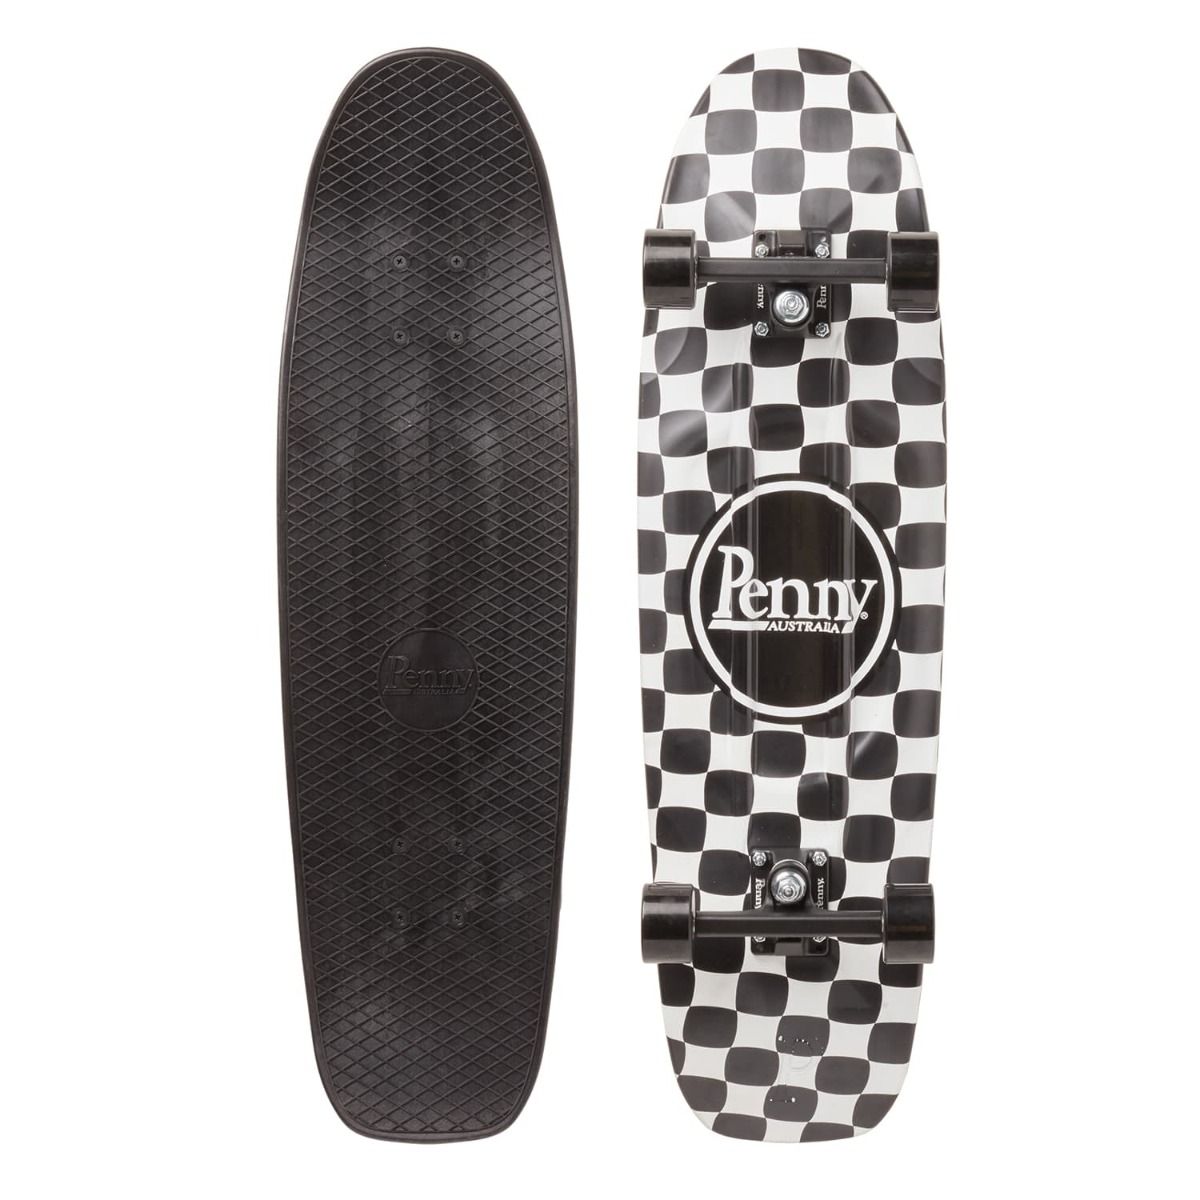 Checkout 32" Complete Cruiser Skateboard by Penny